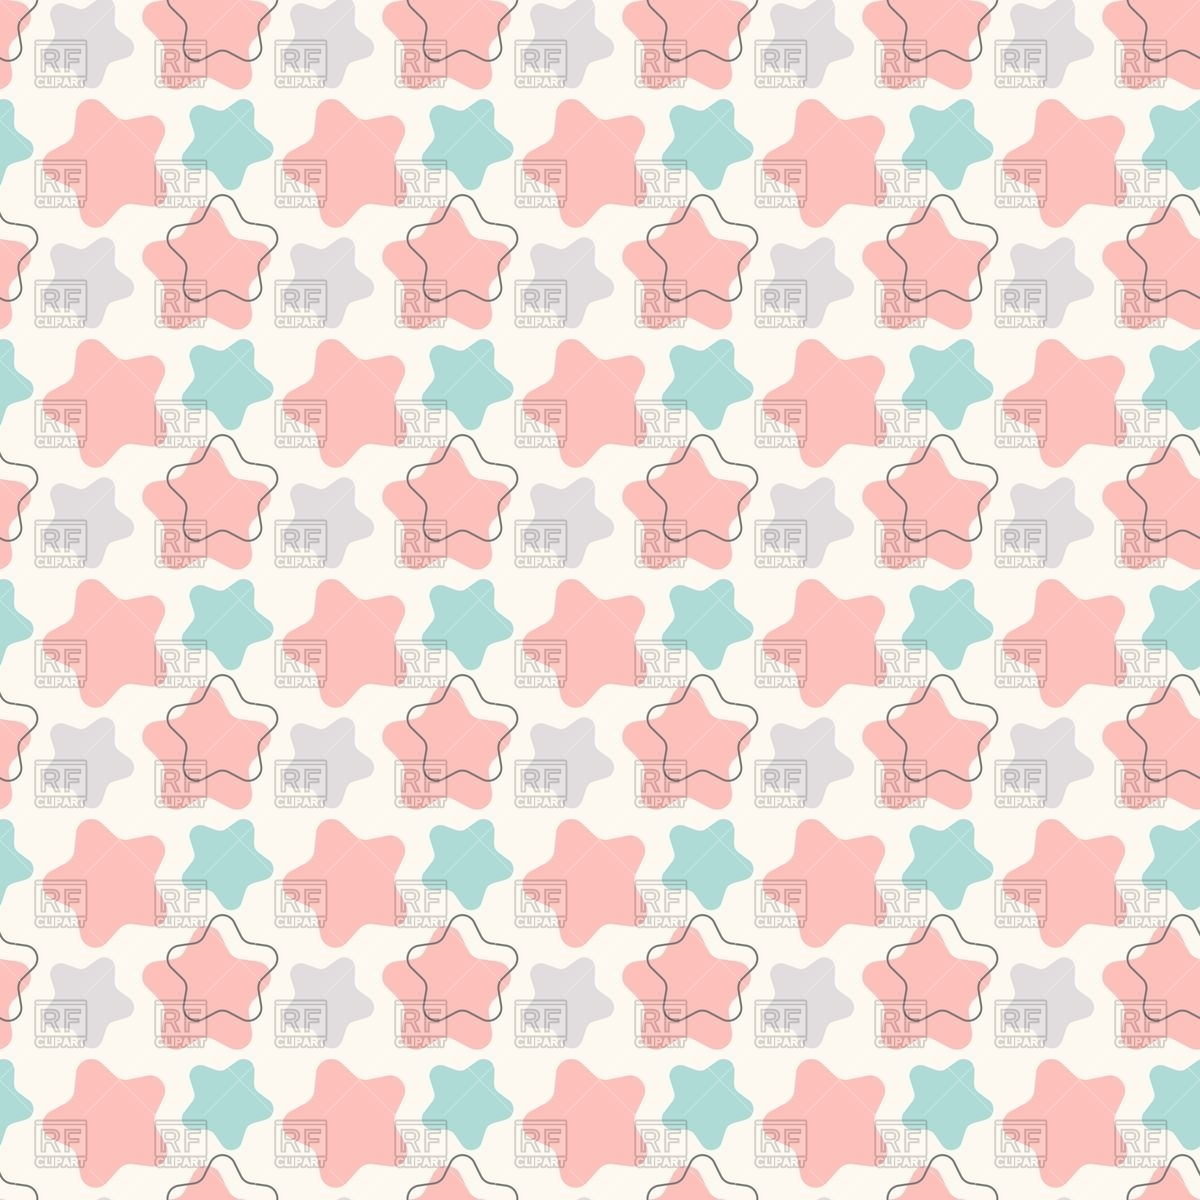 Cute Vintage Seamless Wallpaper With Stars Background Textures